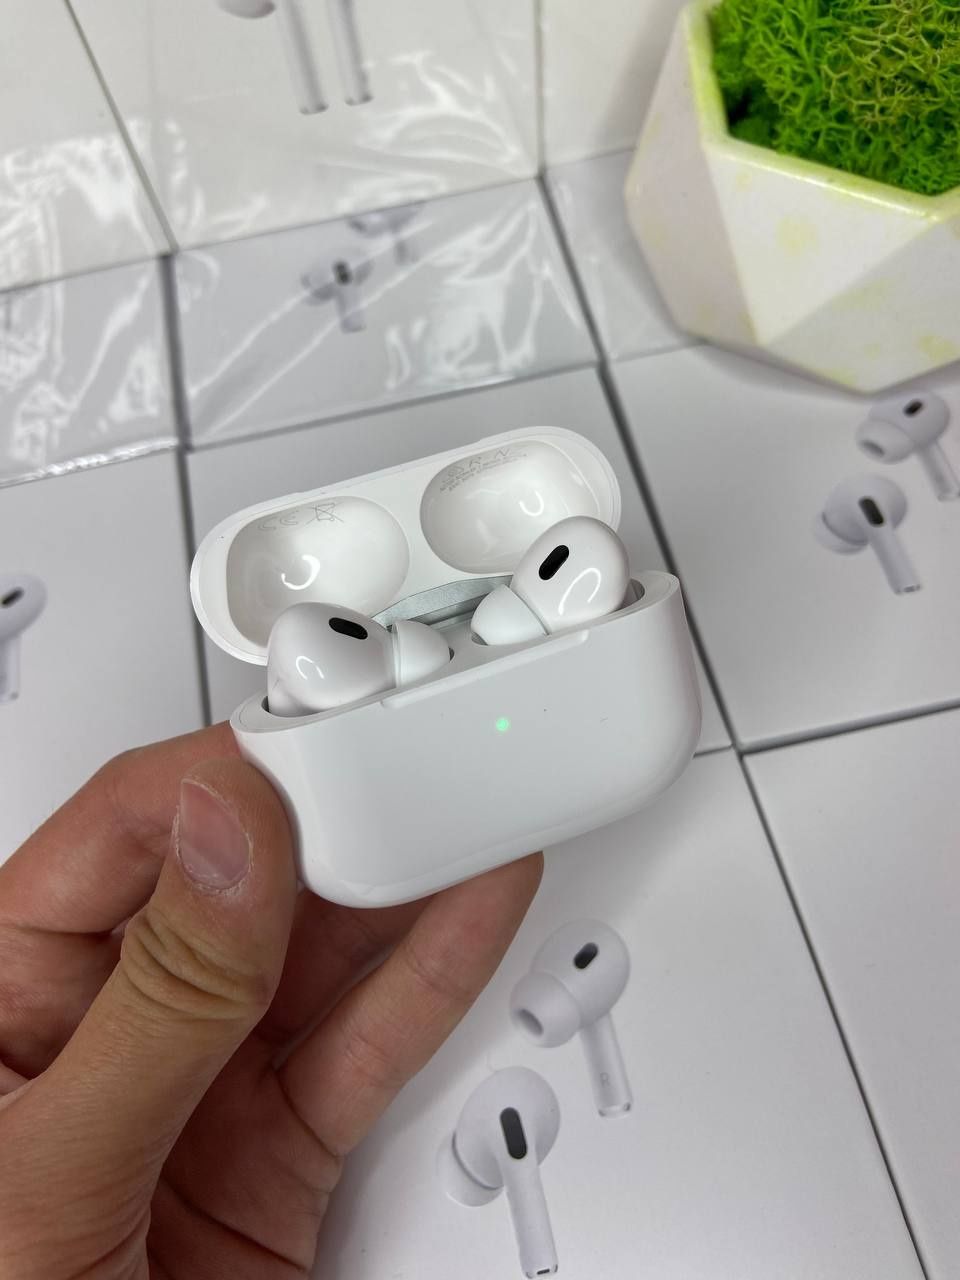 Airpods 2 PRO  )